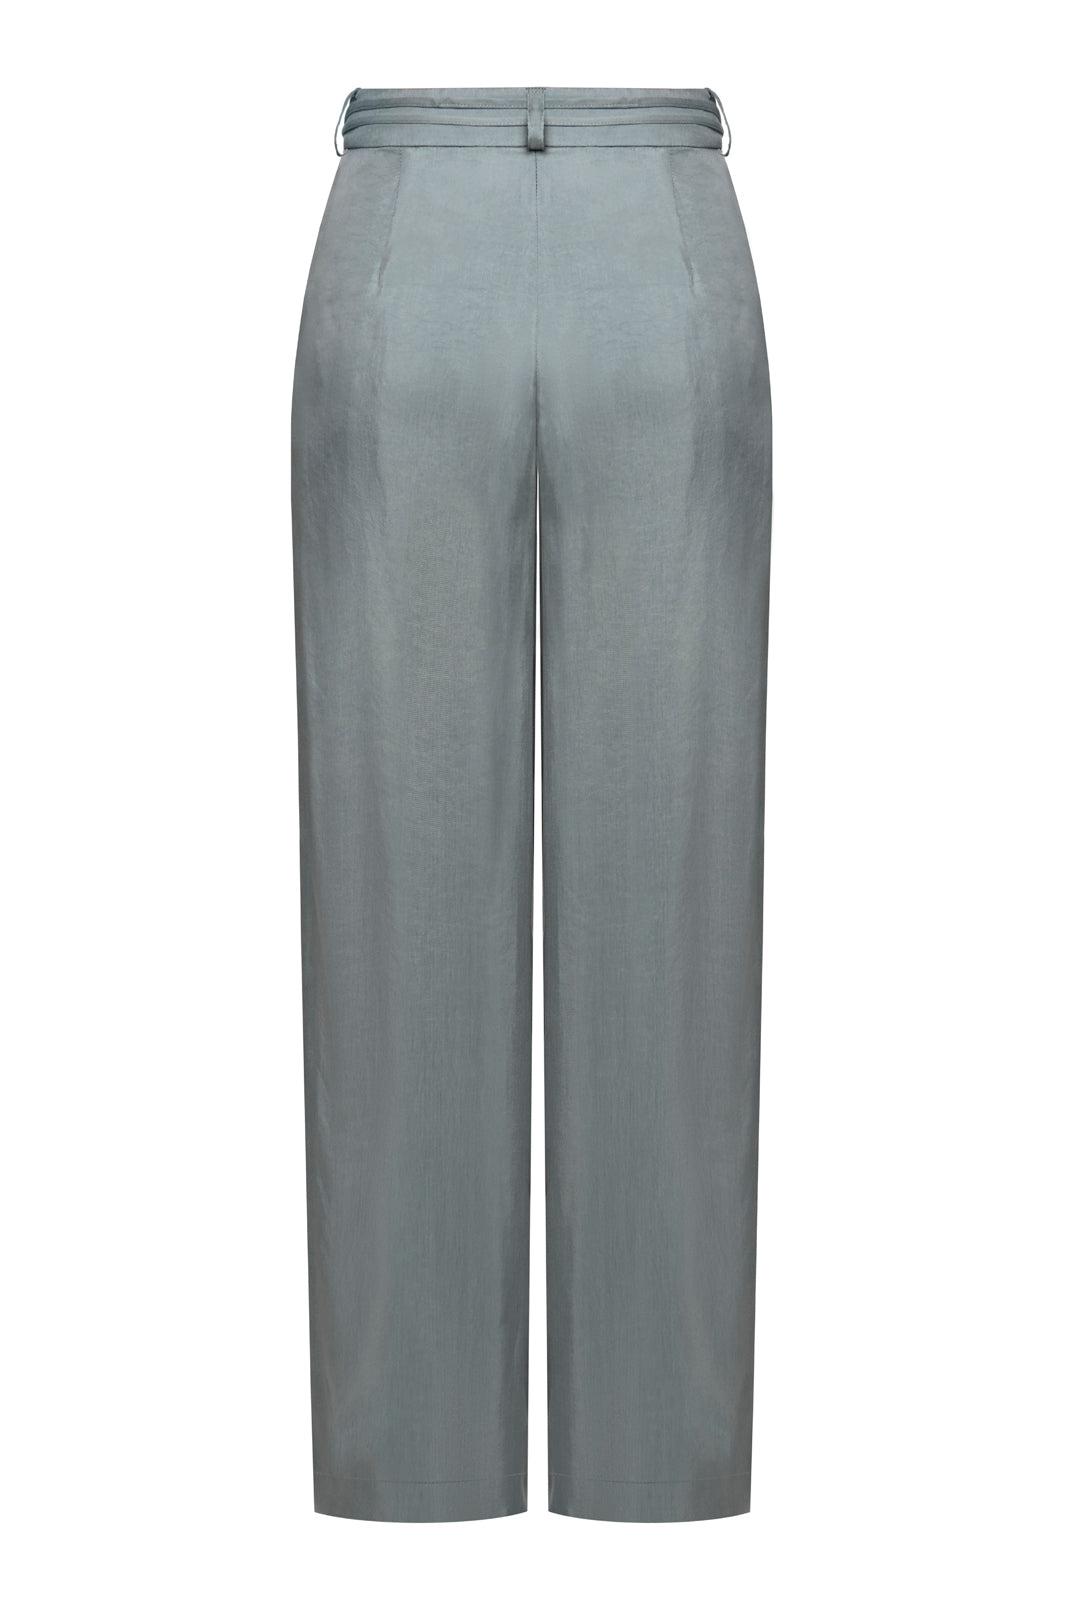 Load image into Gallery viewer, Tie Detail Cupro Pants
